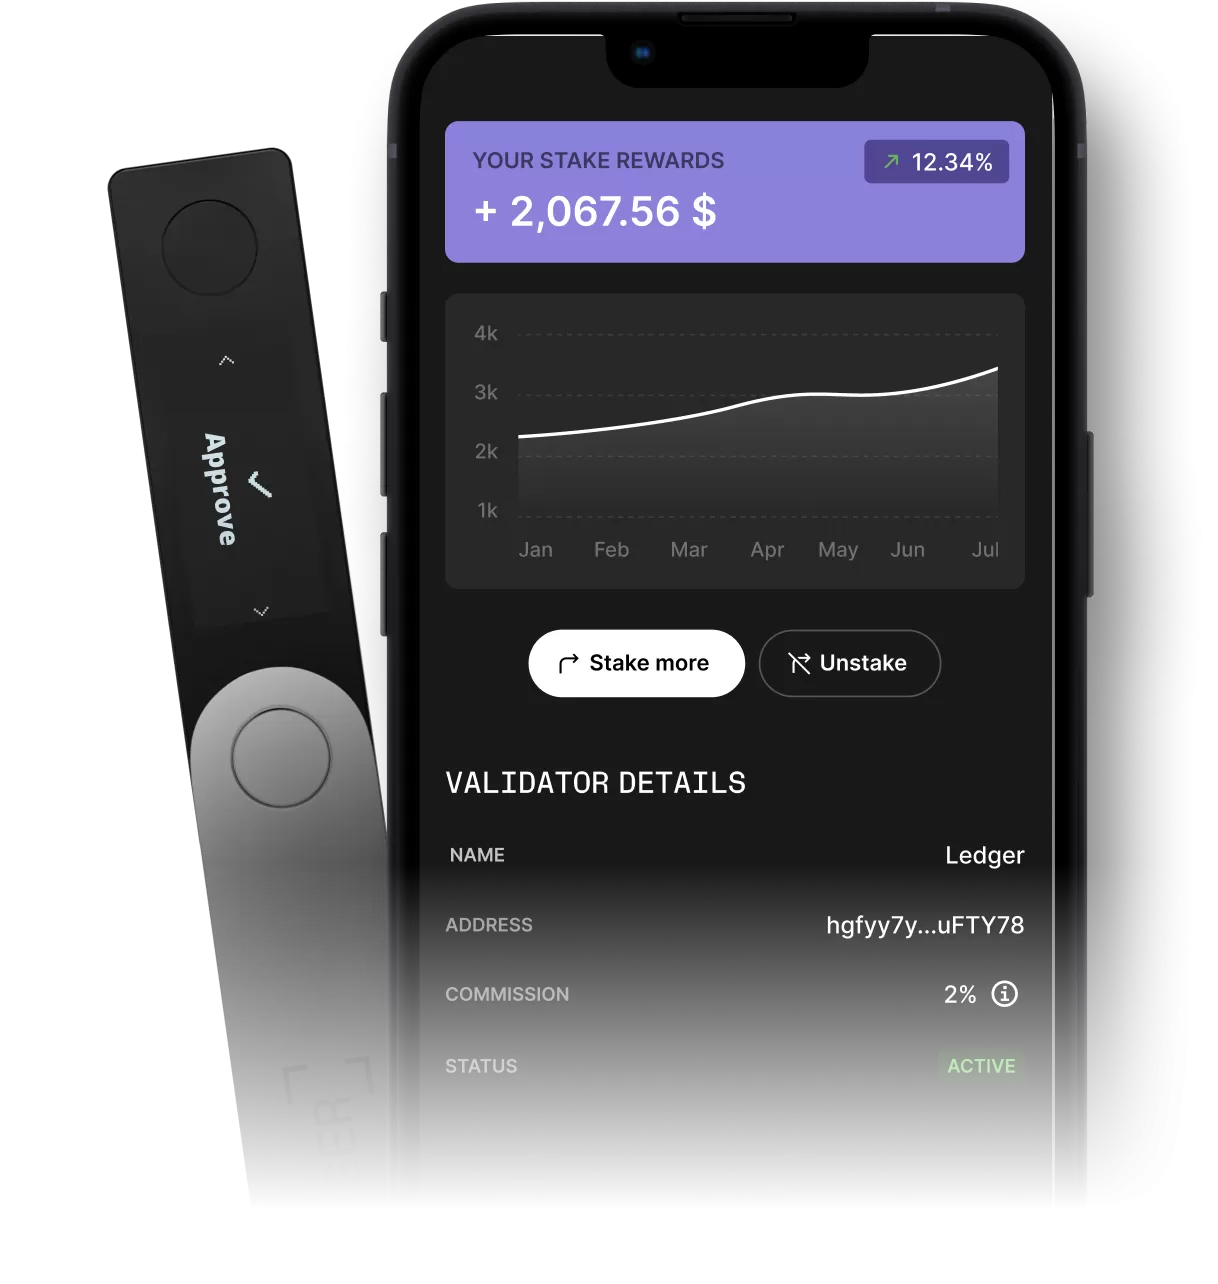 TRON (TRX) Now Supported on Ledger Nano S